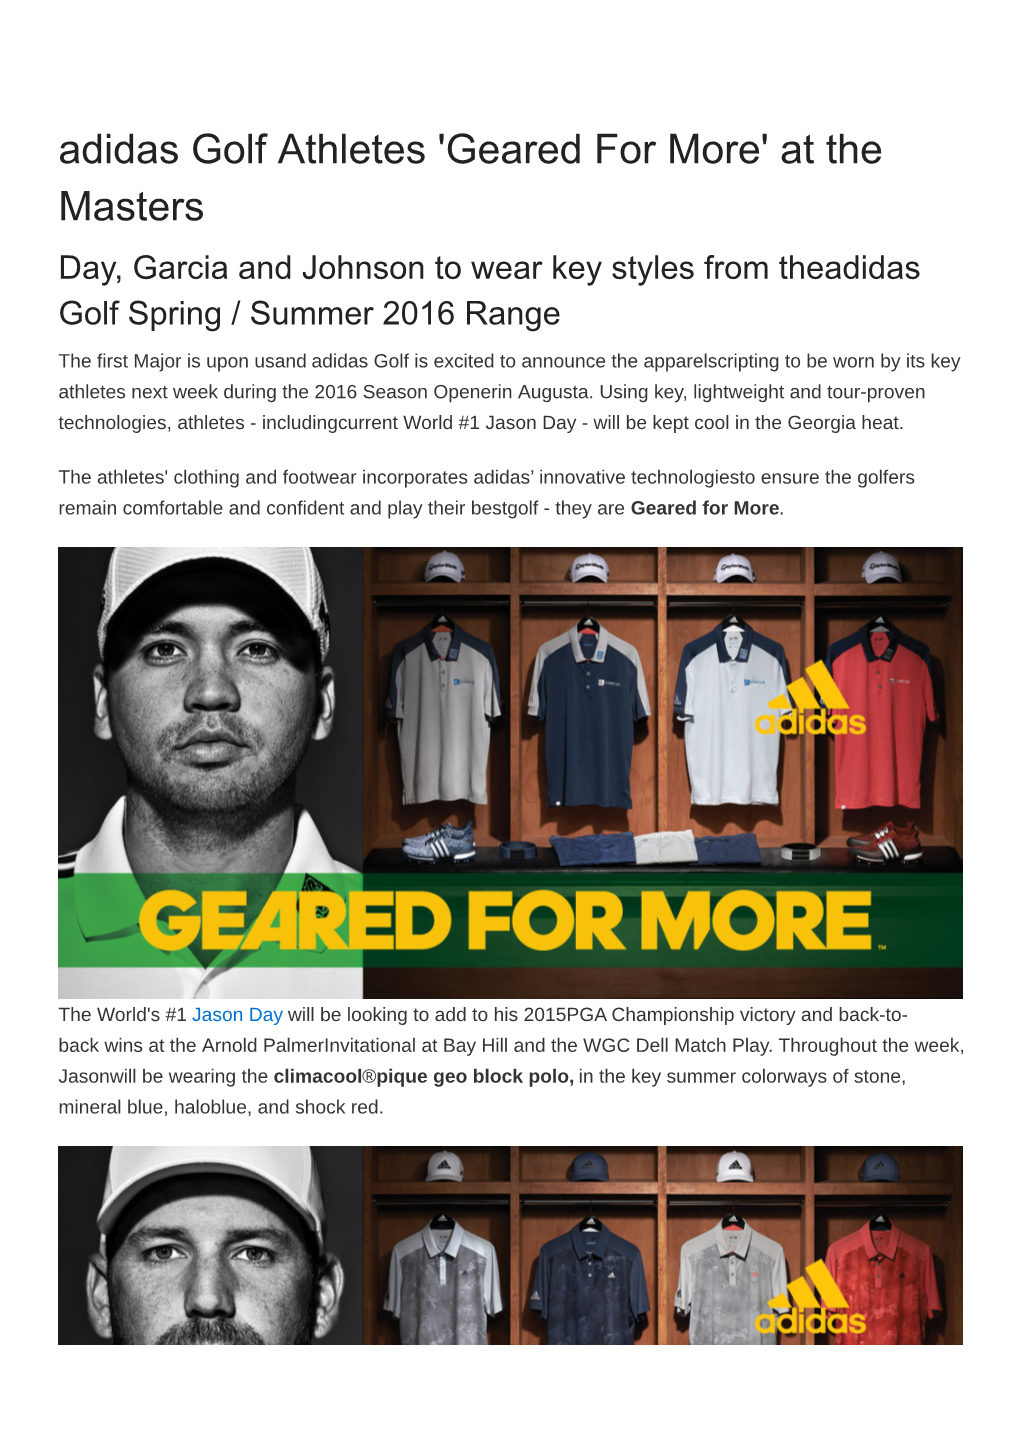 Adidas Golf Athletes 'Geared for More' at the Masters Day, Garcia and Johnson to Wear Key Styles from Theadidas Golf Spring / Summer 2016 Range